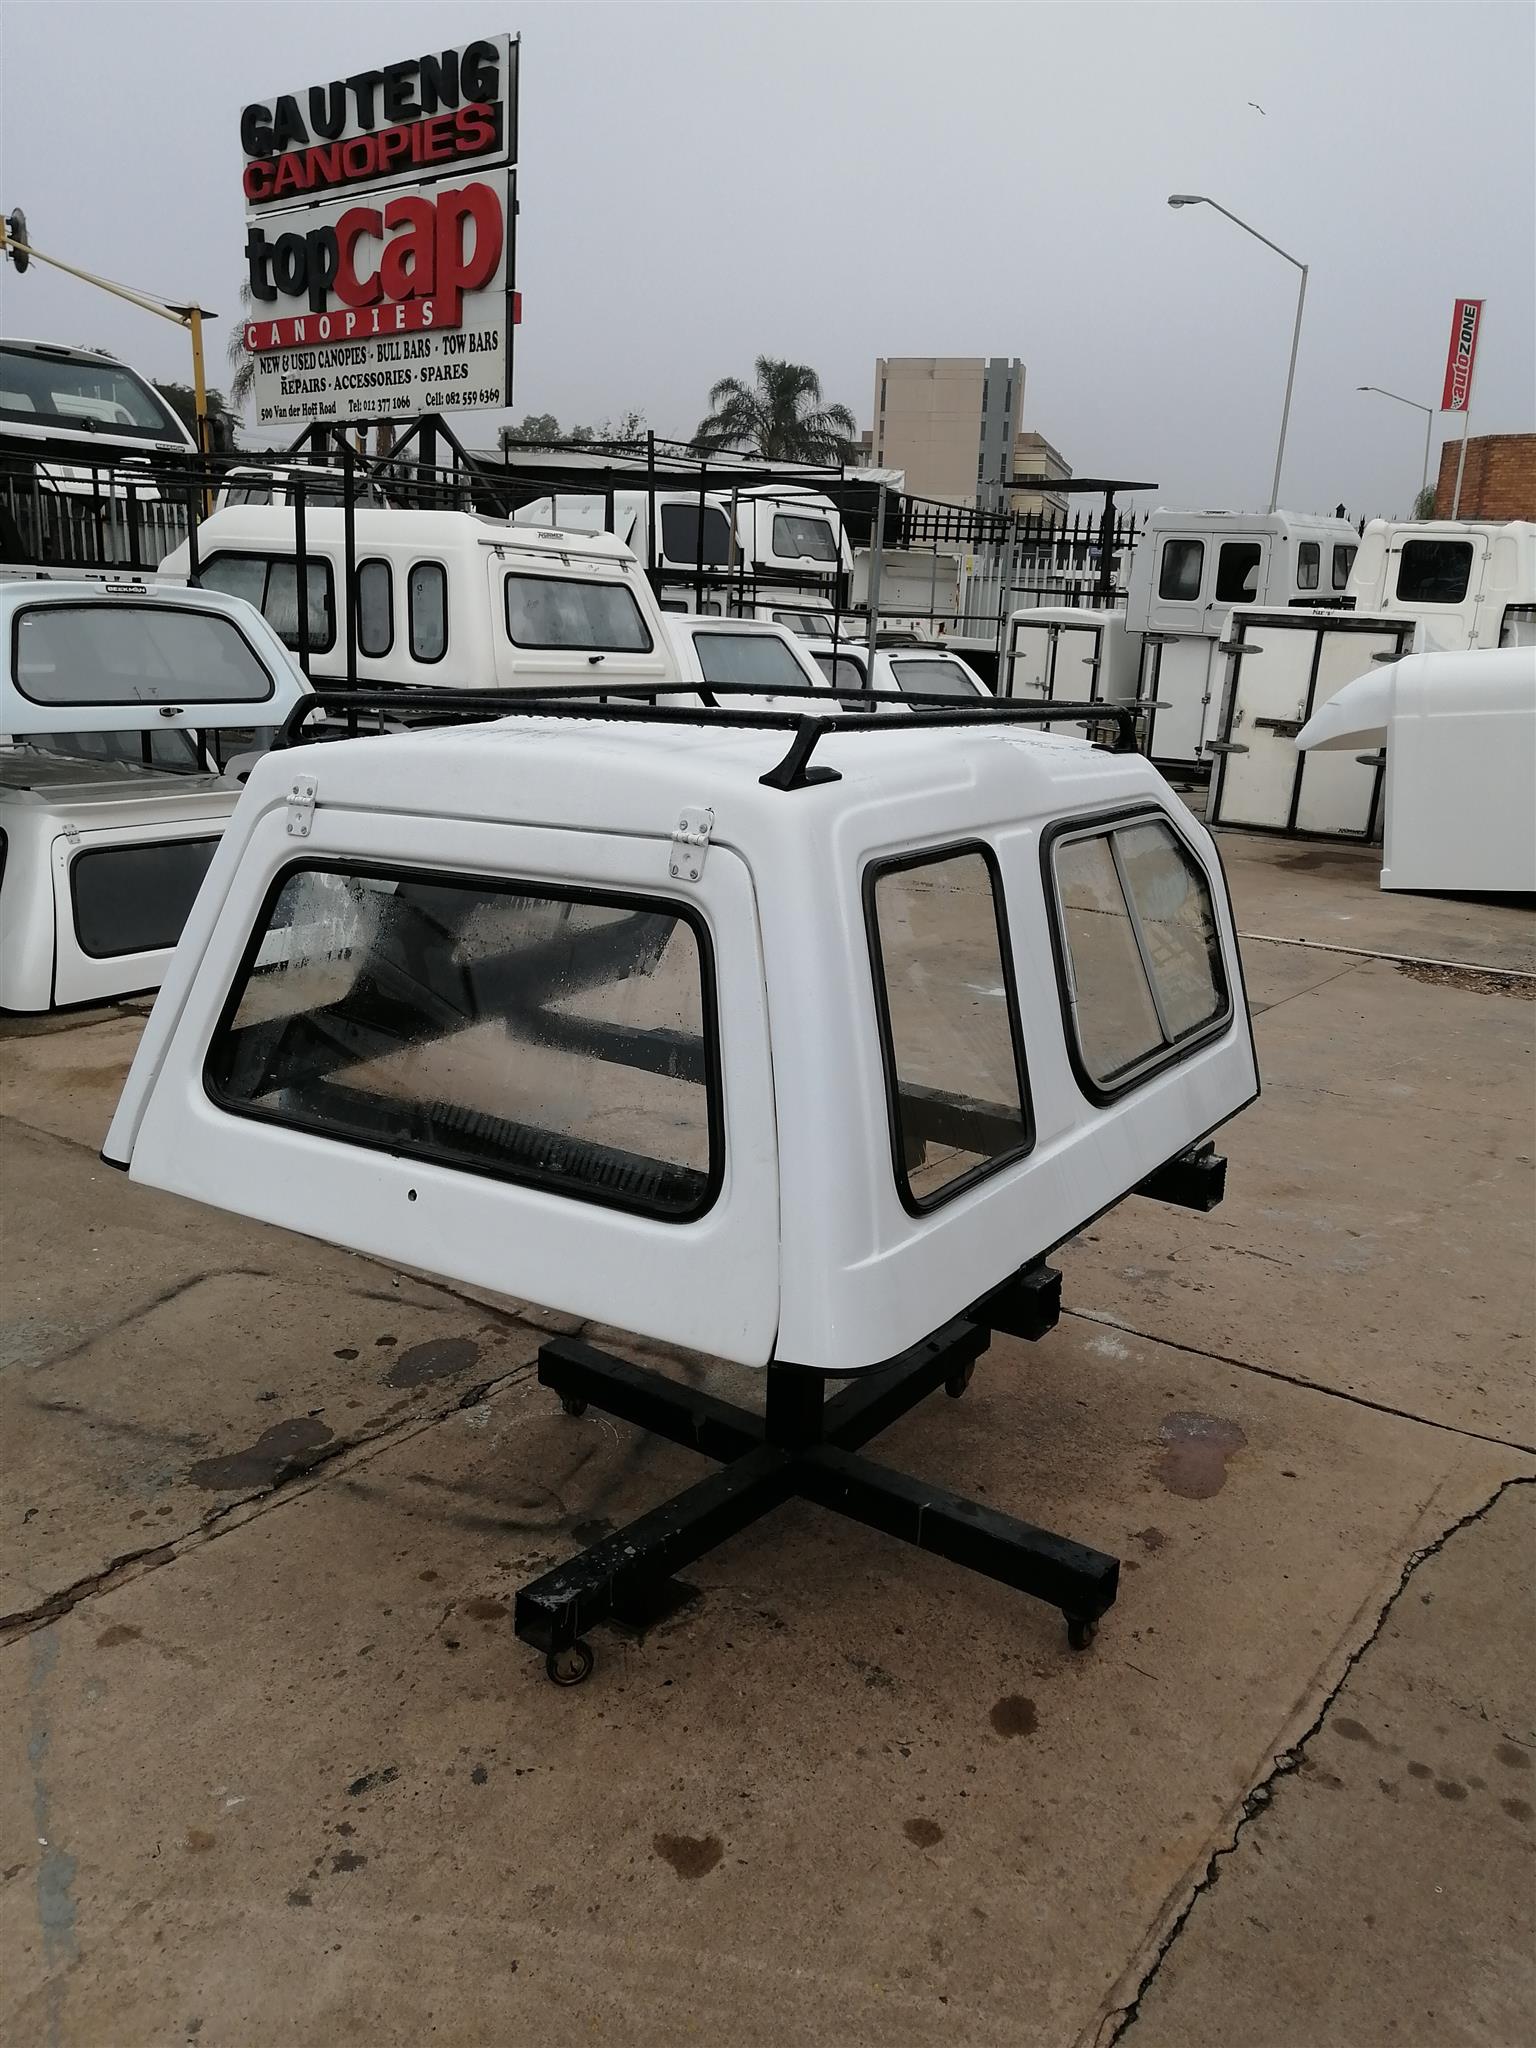 Nissan 1400 Used Hi-Liner beekman Canopy for sale!!